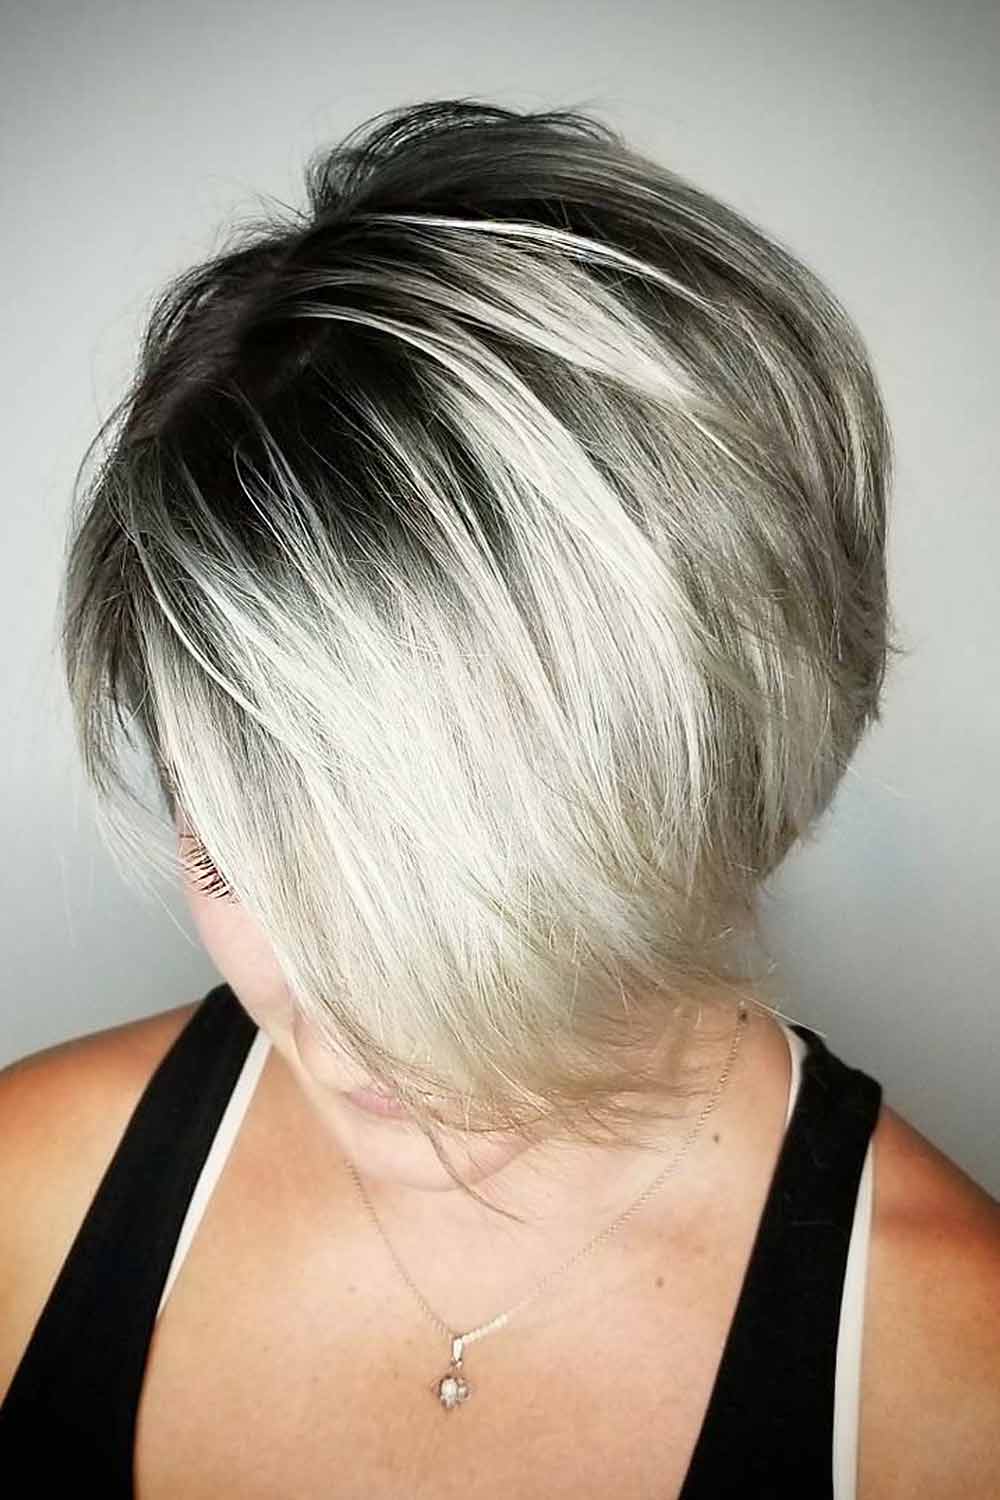 Medium Blonde Bob with Black Roots For Woman #blackandblondehair #blackhair #blondehair